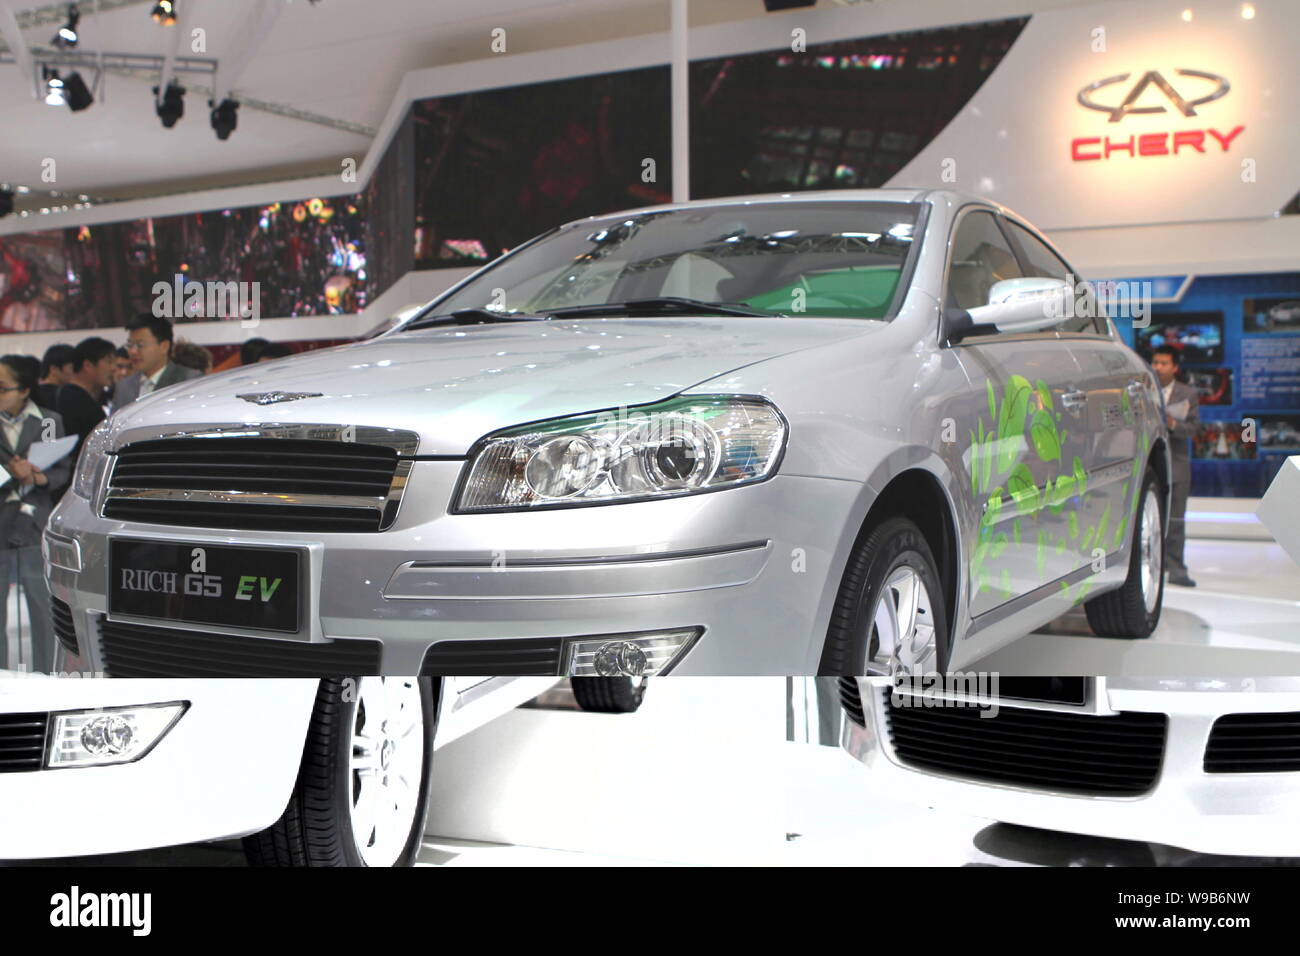 A Chery Riich G5 EV is seen on display during an auto show in Beijing, China, April 23, 2010.   Chery Automobile Co., the largest home-grown carmaker Stock Photo